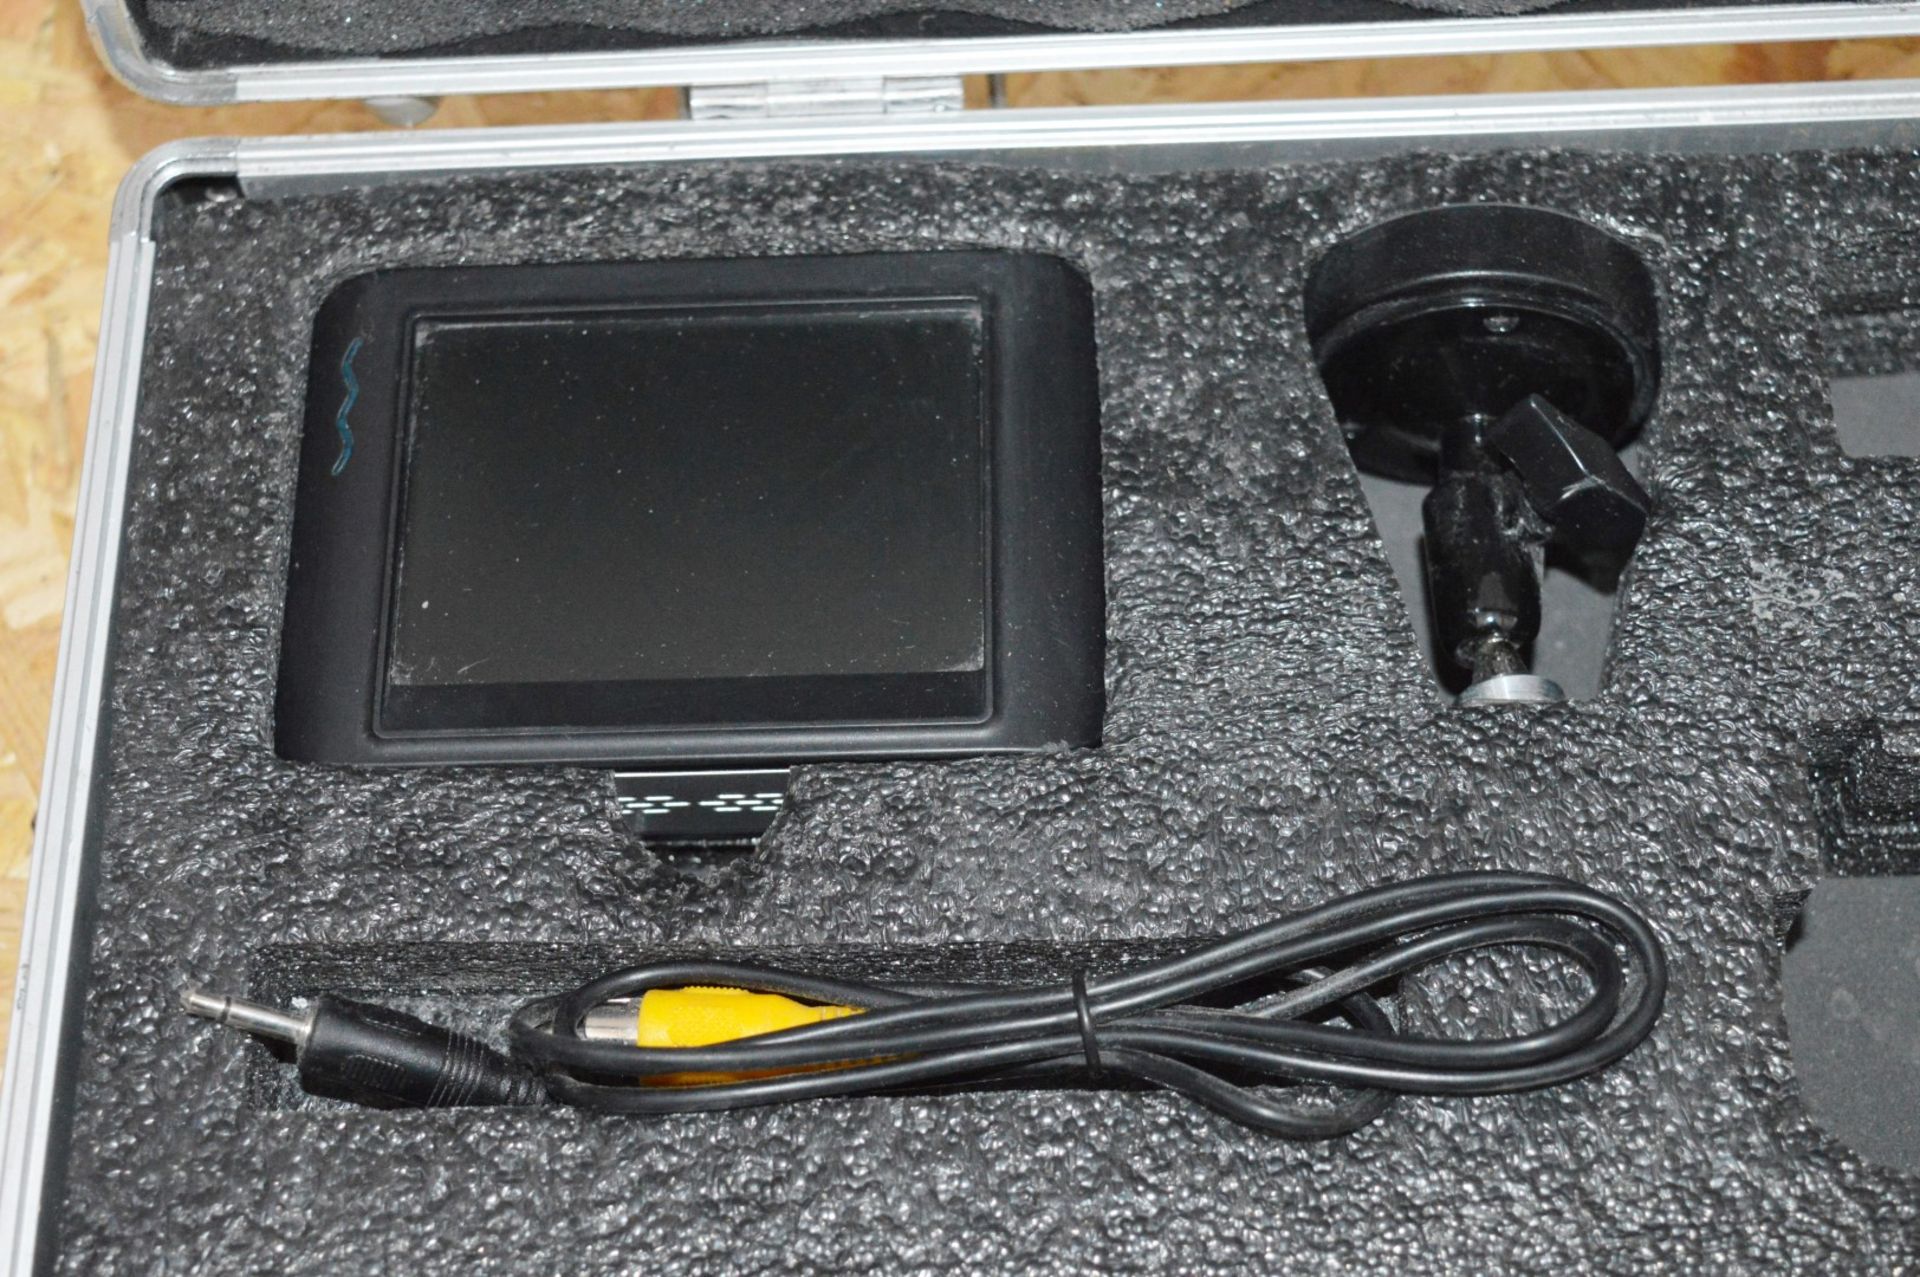 1 x Cavic Test Mate Cavity Inspection Camera - Includes Wireless Inspection Camera and Video - Image 4 of 6